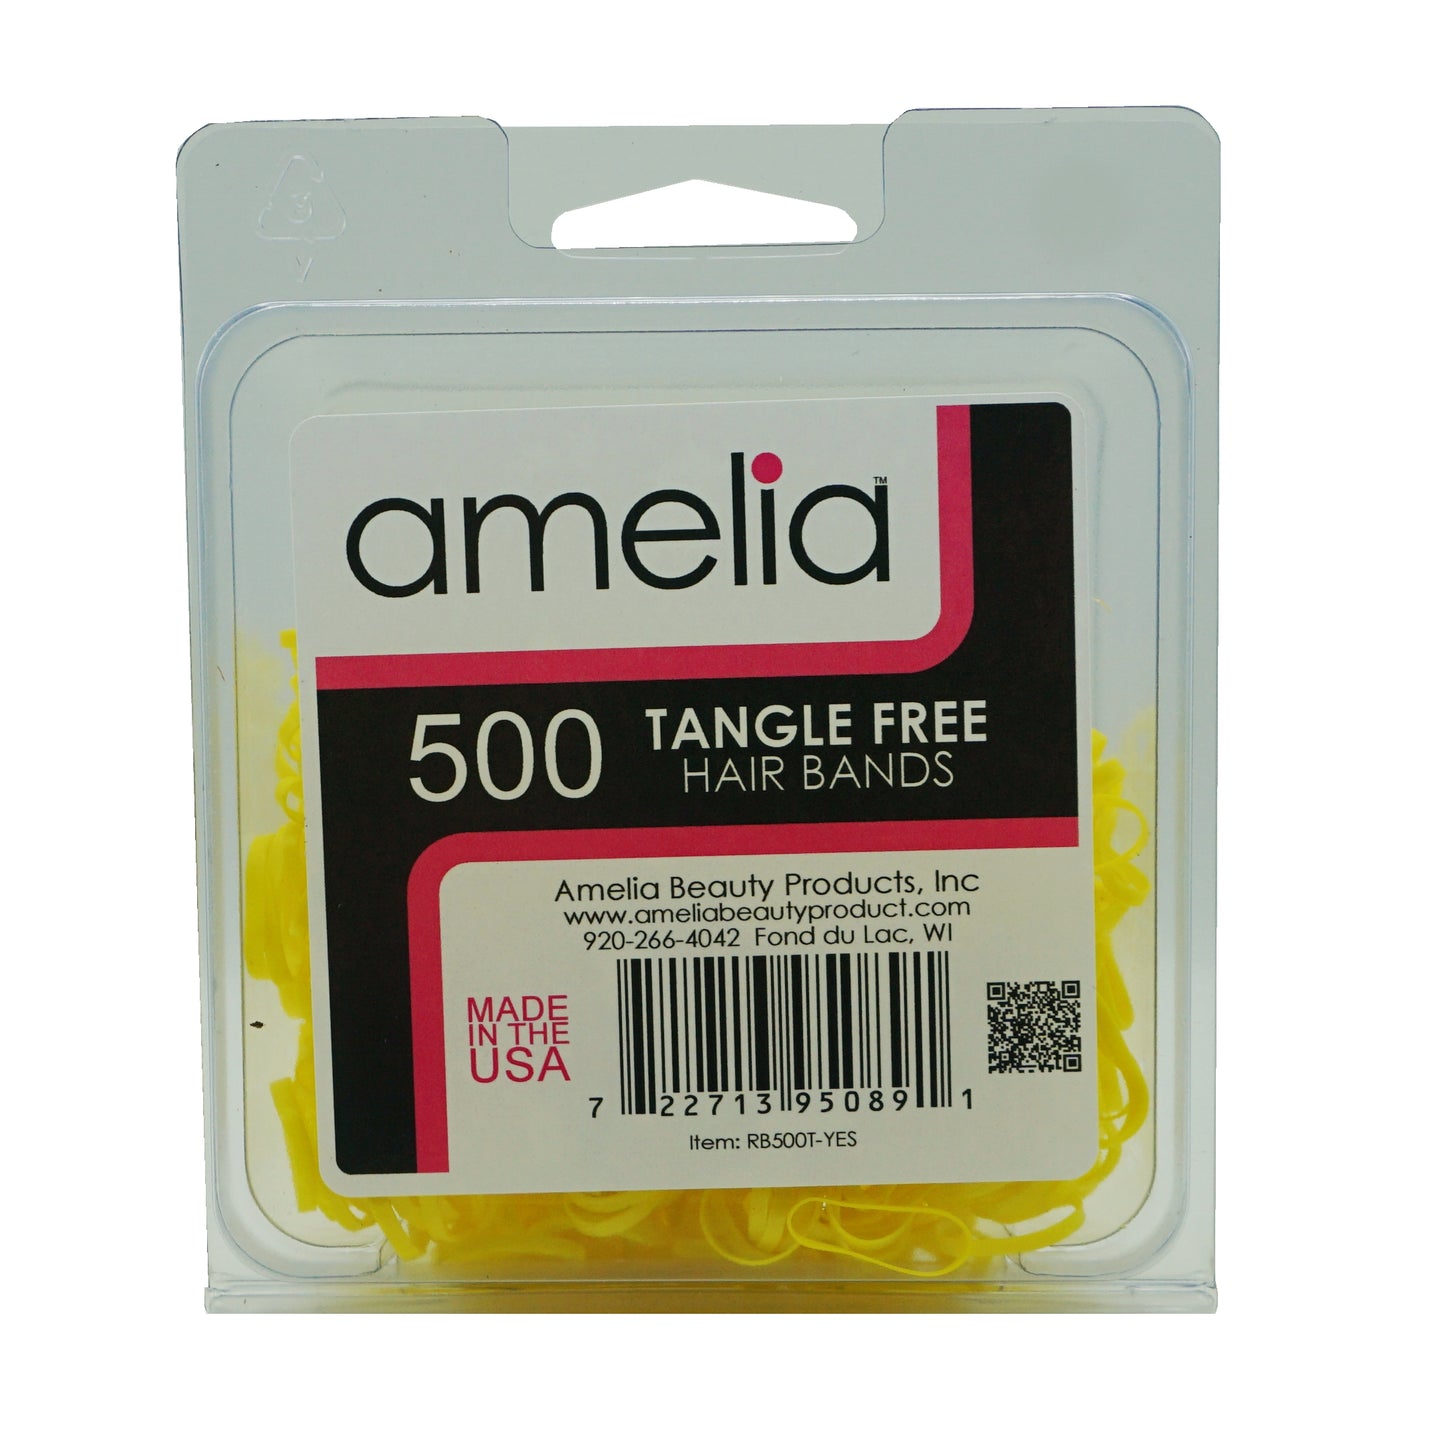 Amelia Beauty | 1/2in, Yellow, Tangle Free Elastic Pony Tail Holders | Made in USA, Ideal for Ponytails, Braids, Twists. For Women, Girls. Pain Free, Snag Free, Easy Off | 500 Pack